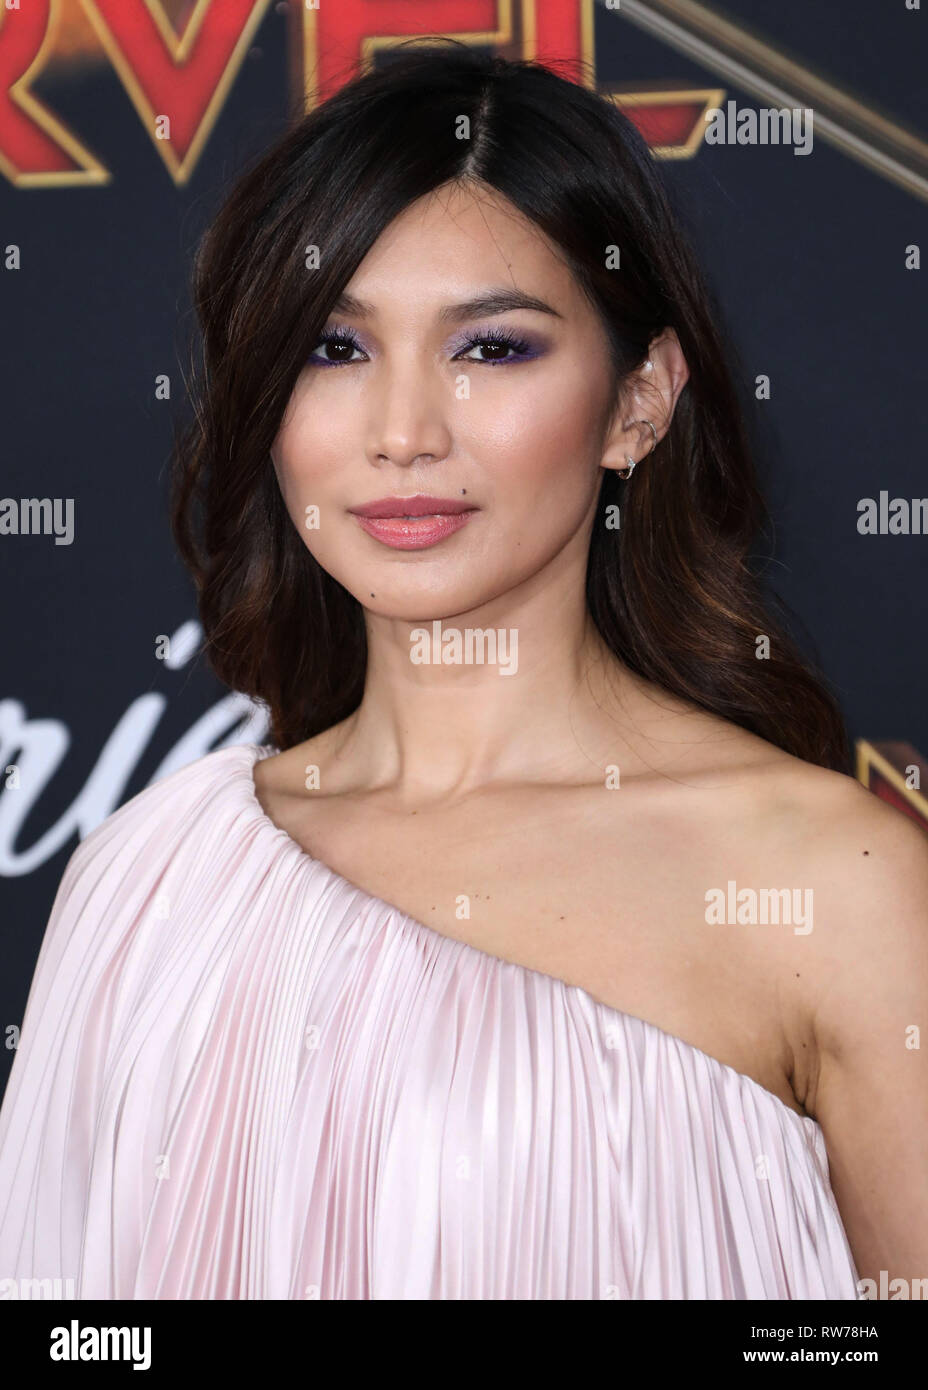 HOLLYWOOD, LOS ANGELES, CA, USA - MARCH 04: Actress Gemma Chan wearing Ralph and Russo arrives at the Los Angeles Premiere Of Marvel Studios 'Captain Marvel' held at the El Capitan Theatre on March 4, 2019 in Hollywood, Los Angeles, California, United States. (Photo by David Acosta/Image Press Agency) Stock Photo